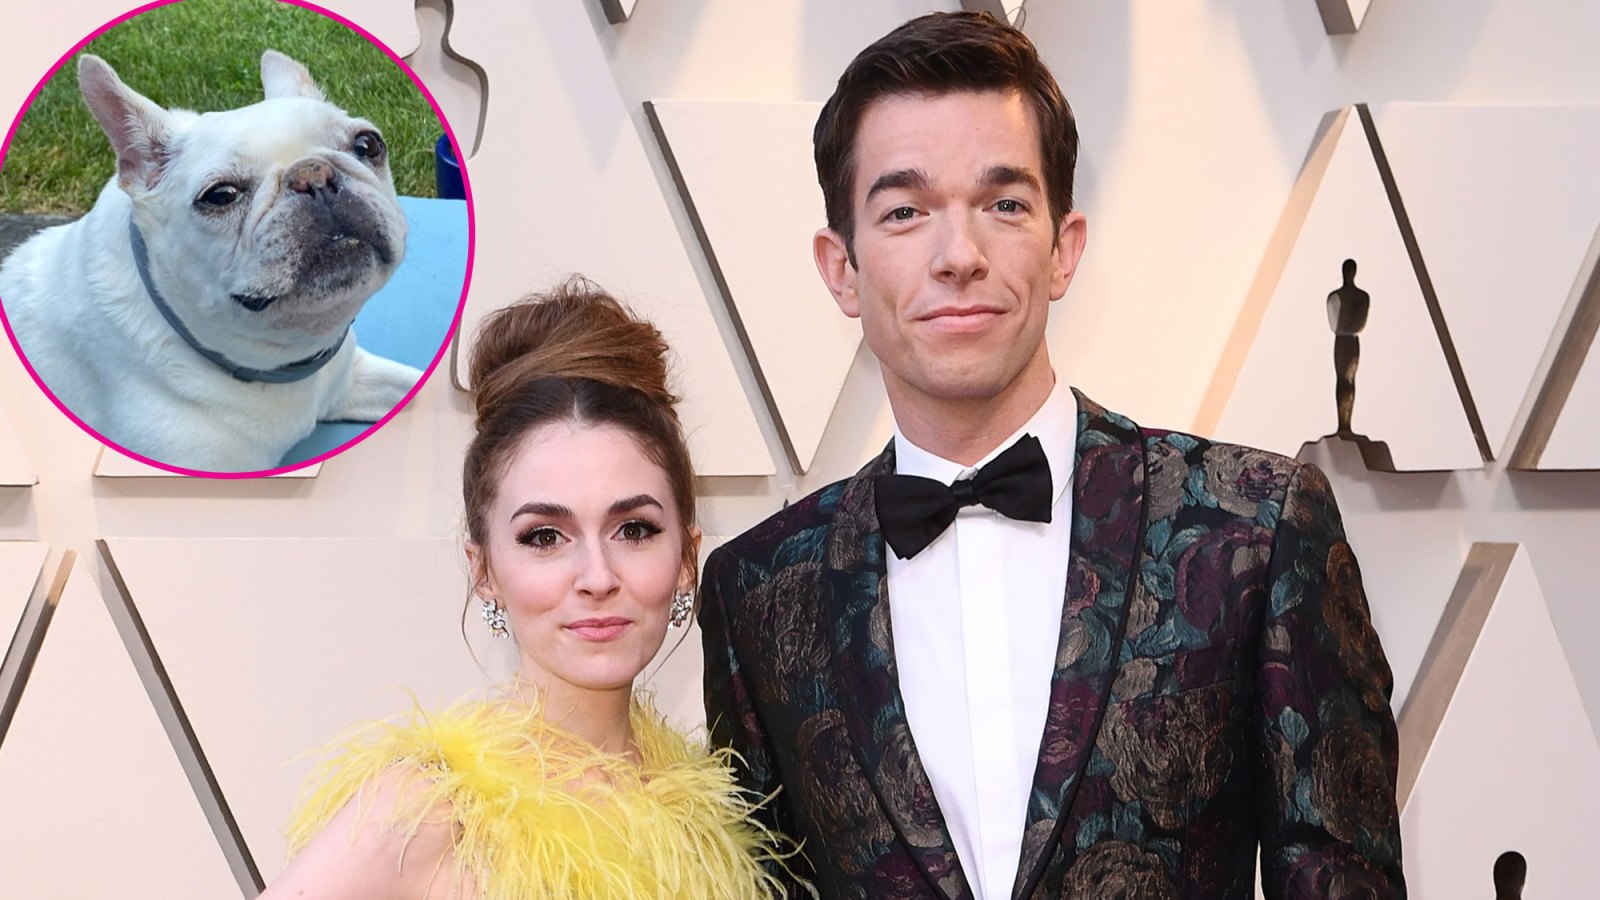 John Mulaney and Ex-Wife Anna Marie Tendler Separately Mourn Death of Beloved French Bulldog Petunia